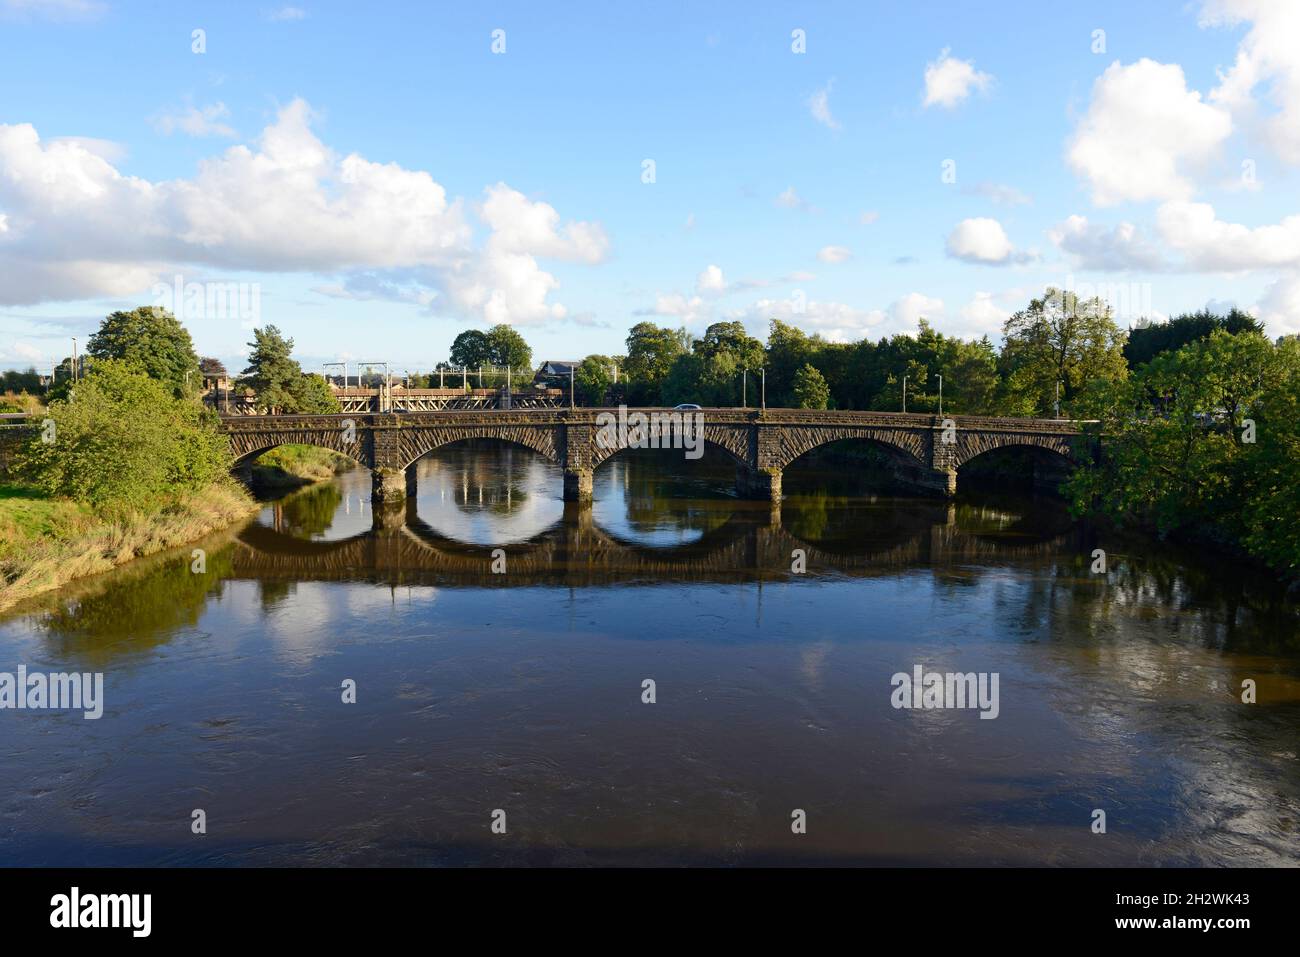 View of Stirling Bridge carrying road traffic across the river Forth, with the railway bridge behind. Stirling, Scotland. Stock Photo